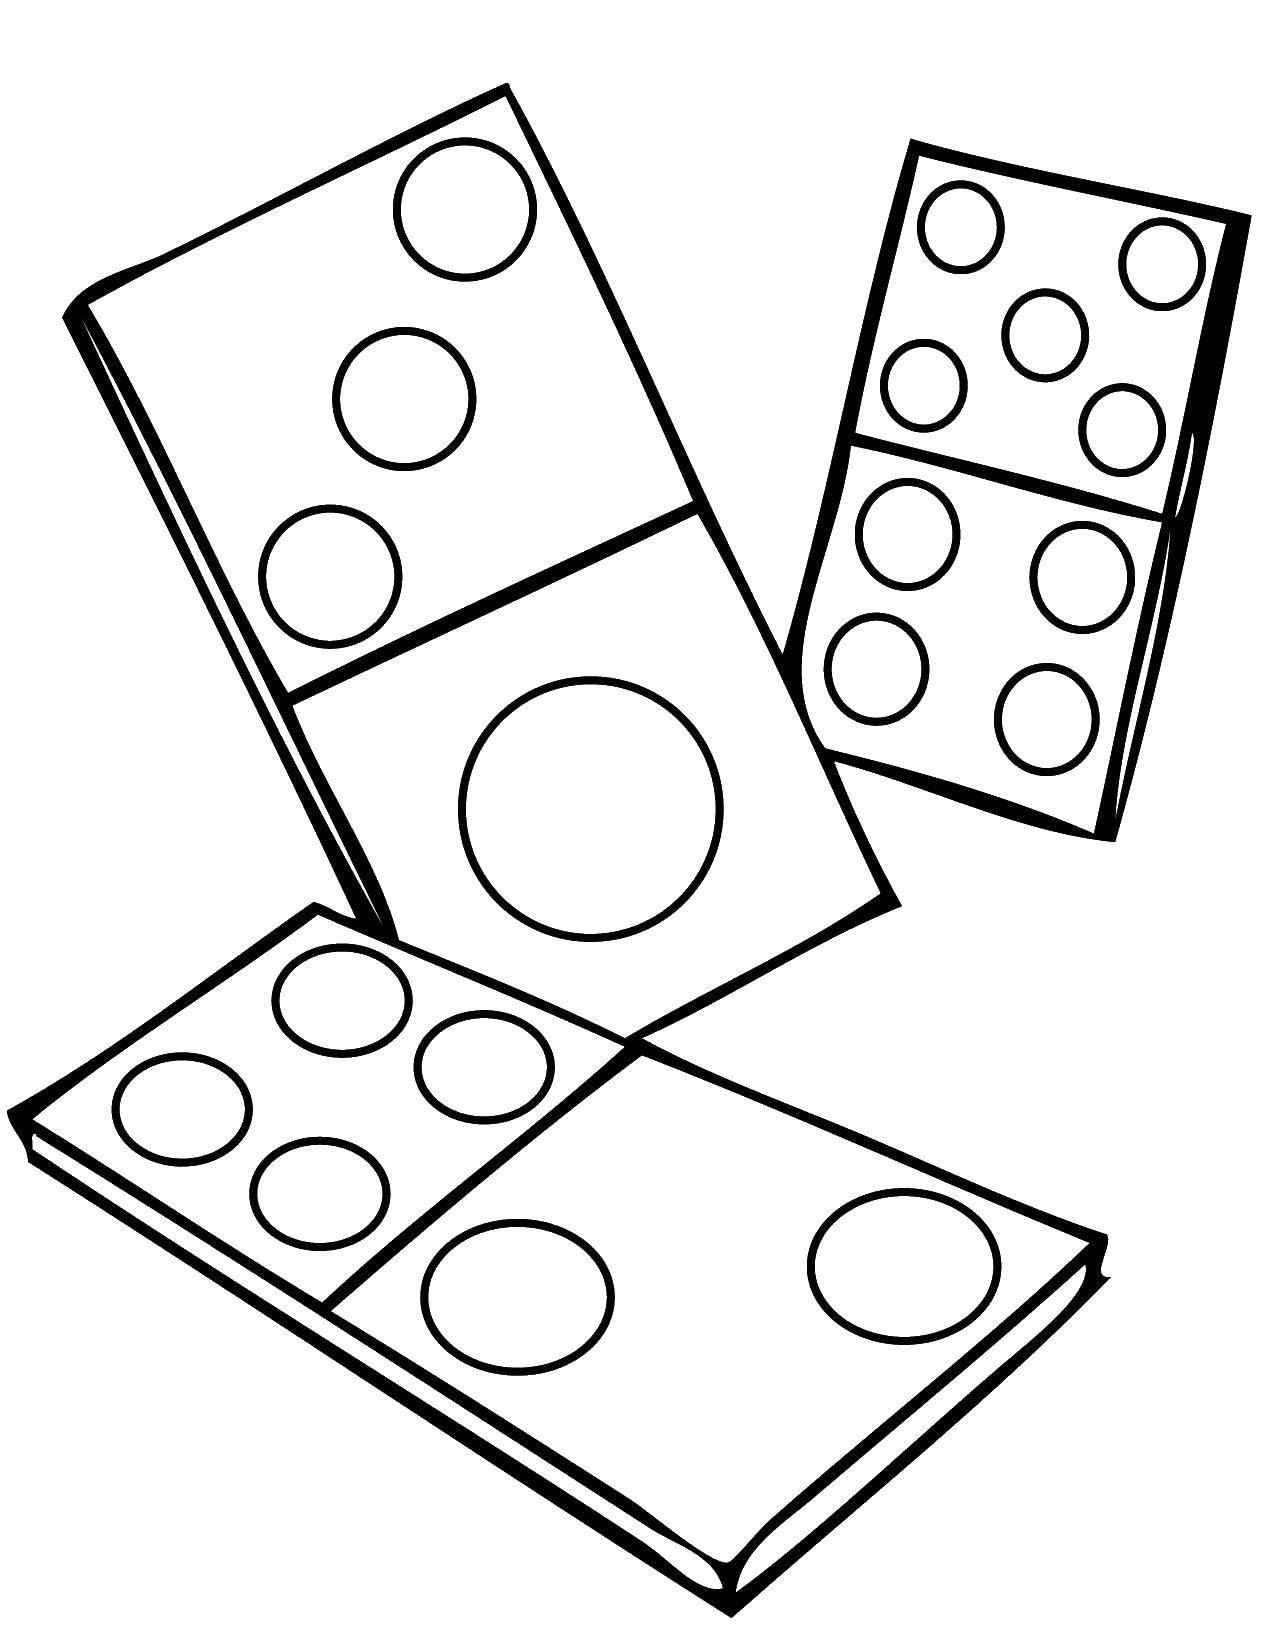 Coloring Domino. Category games. Tags:  Games, dominoes.